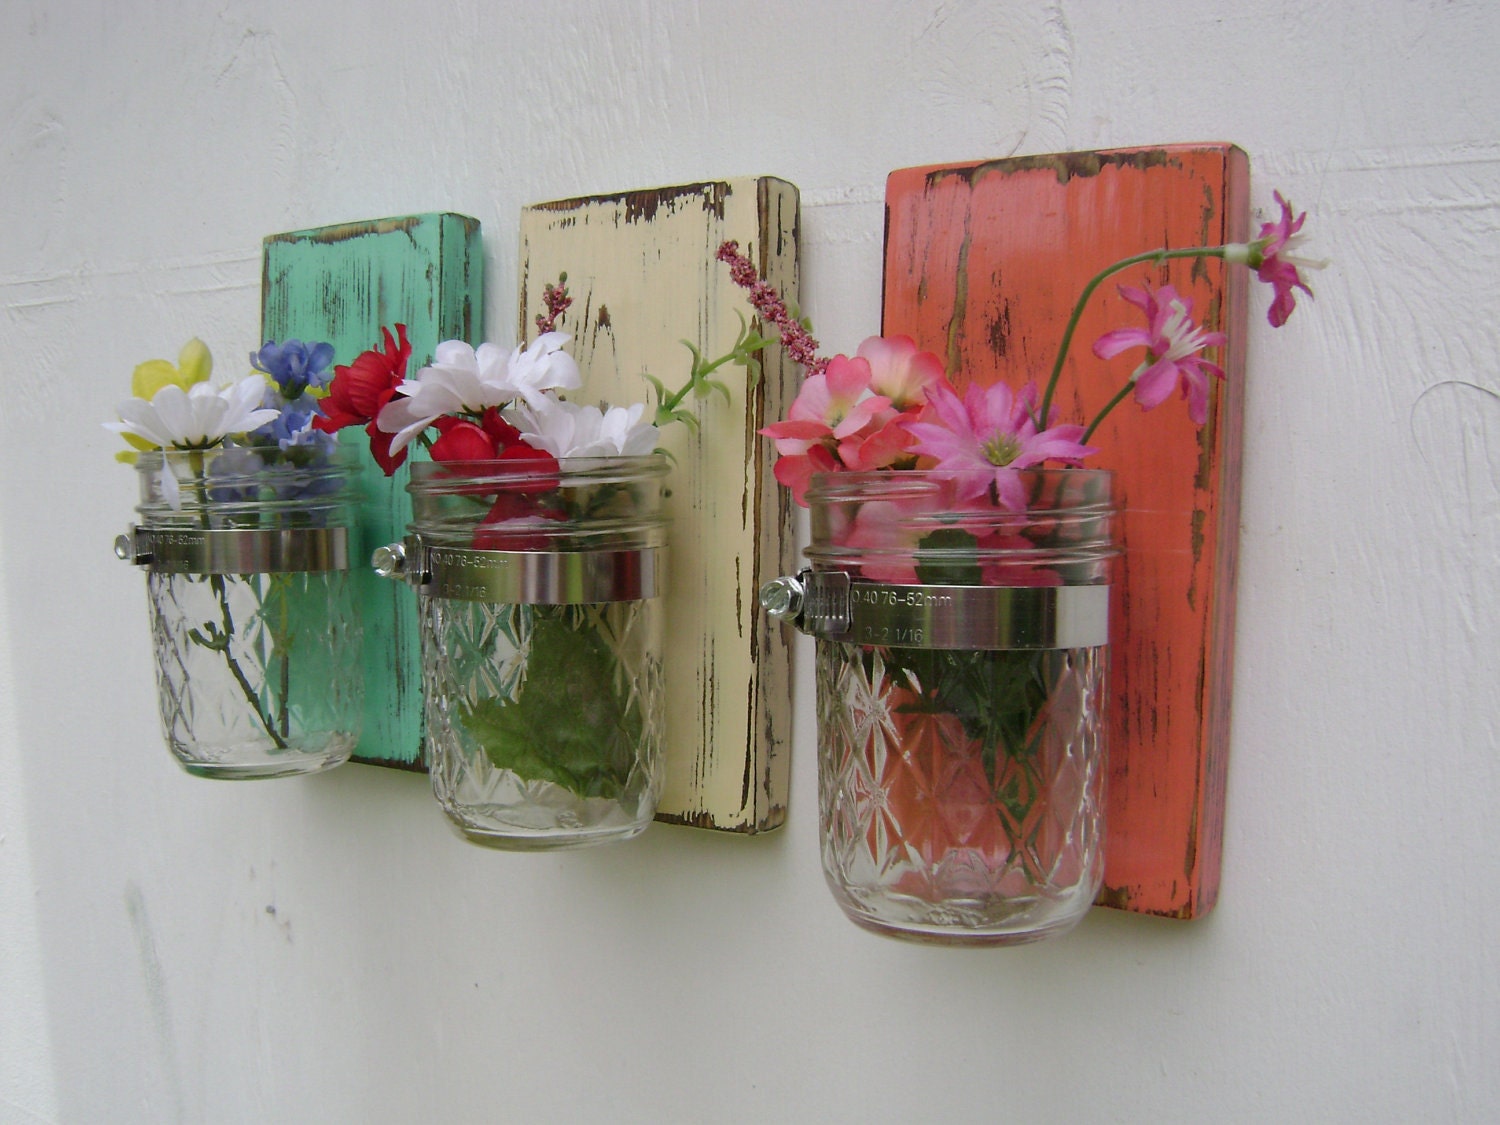 wall sconce shabby chic rustic wooden vases by UncleJohnsCabin